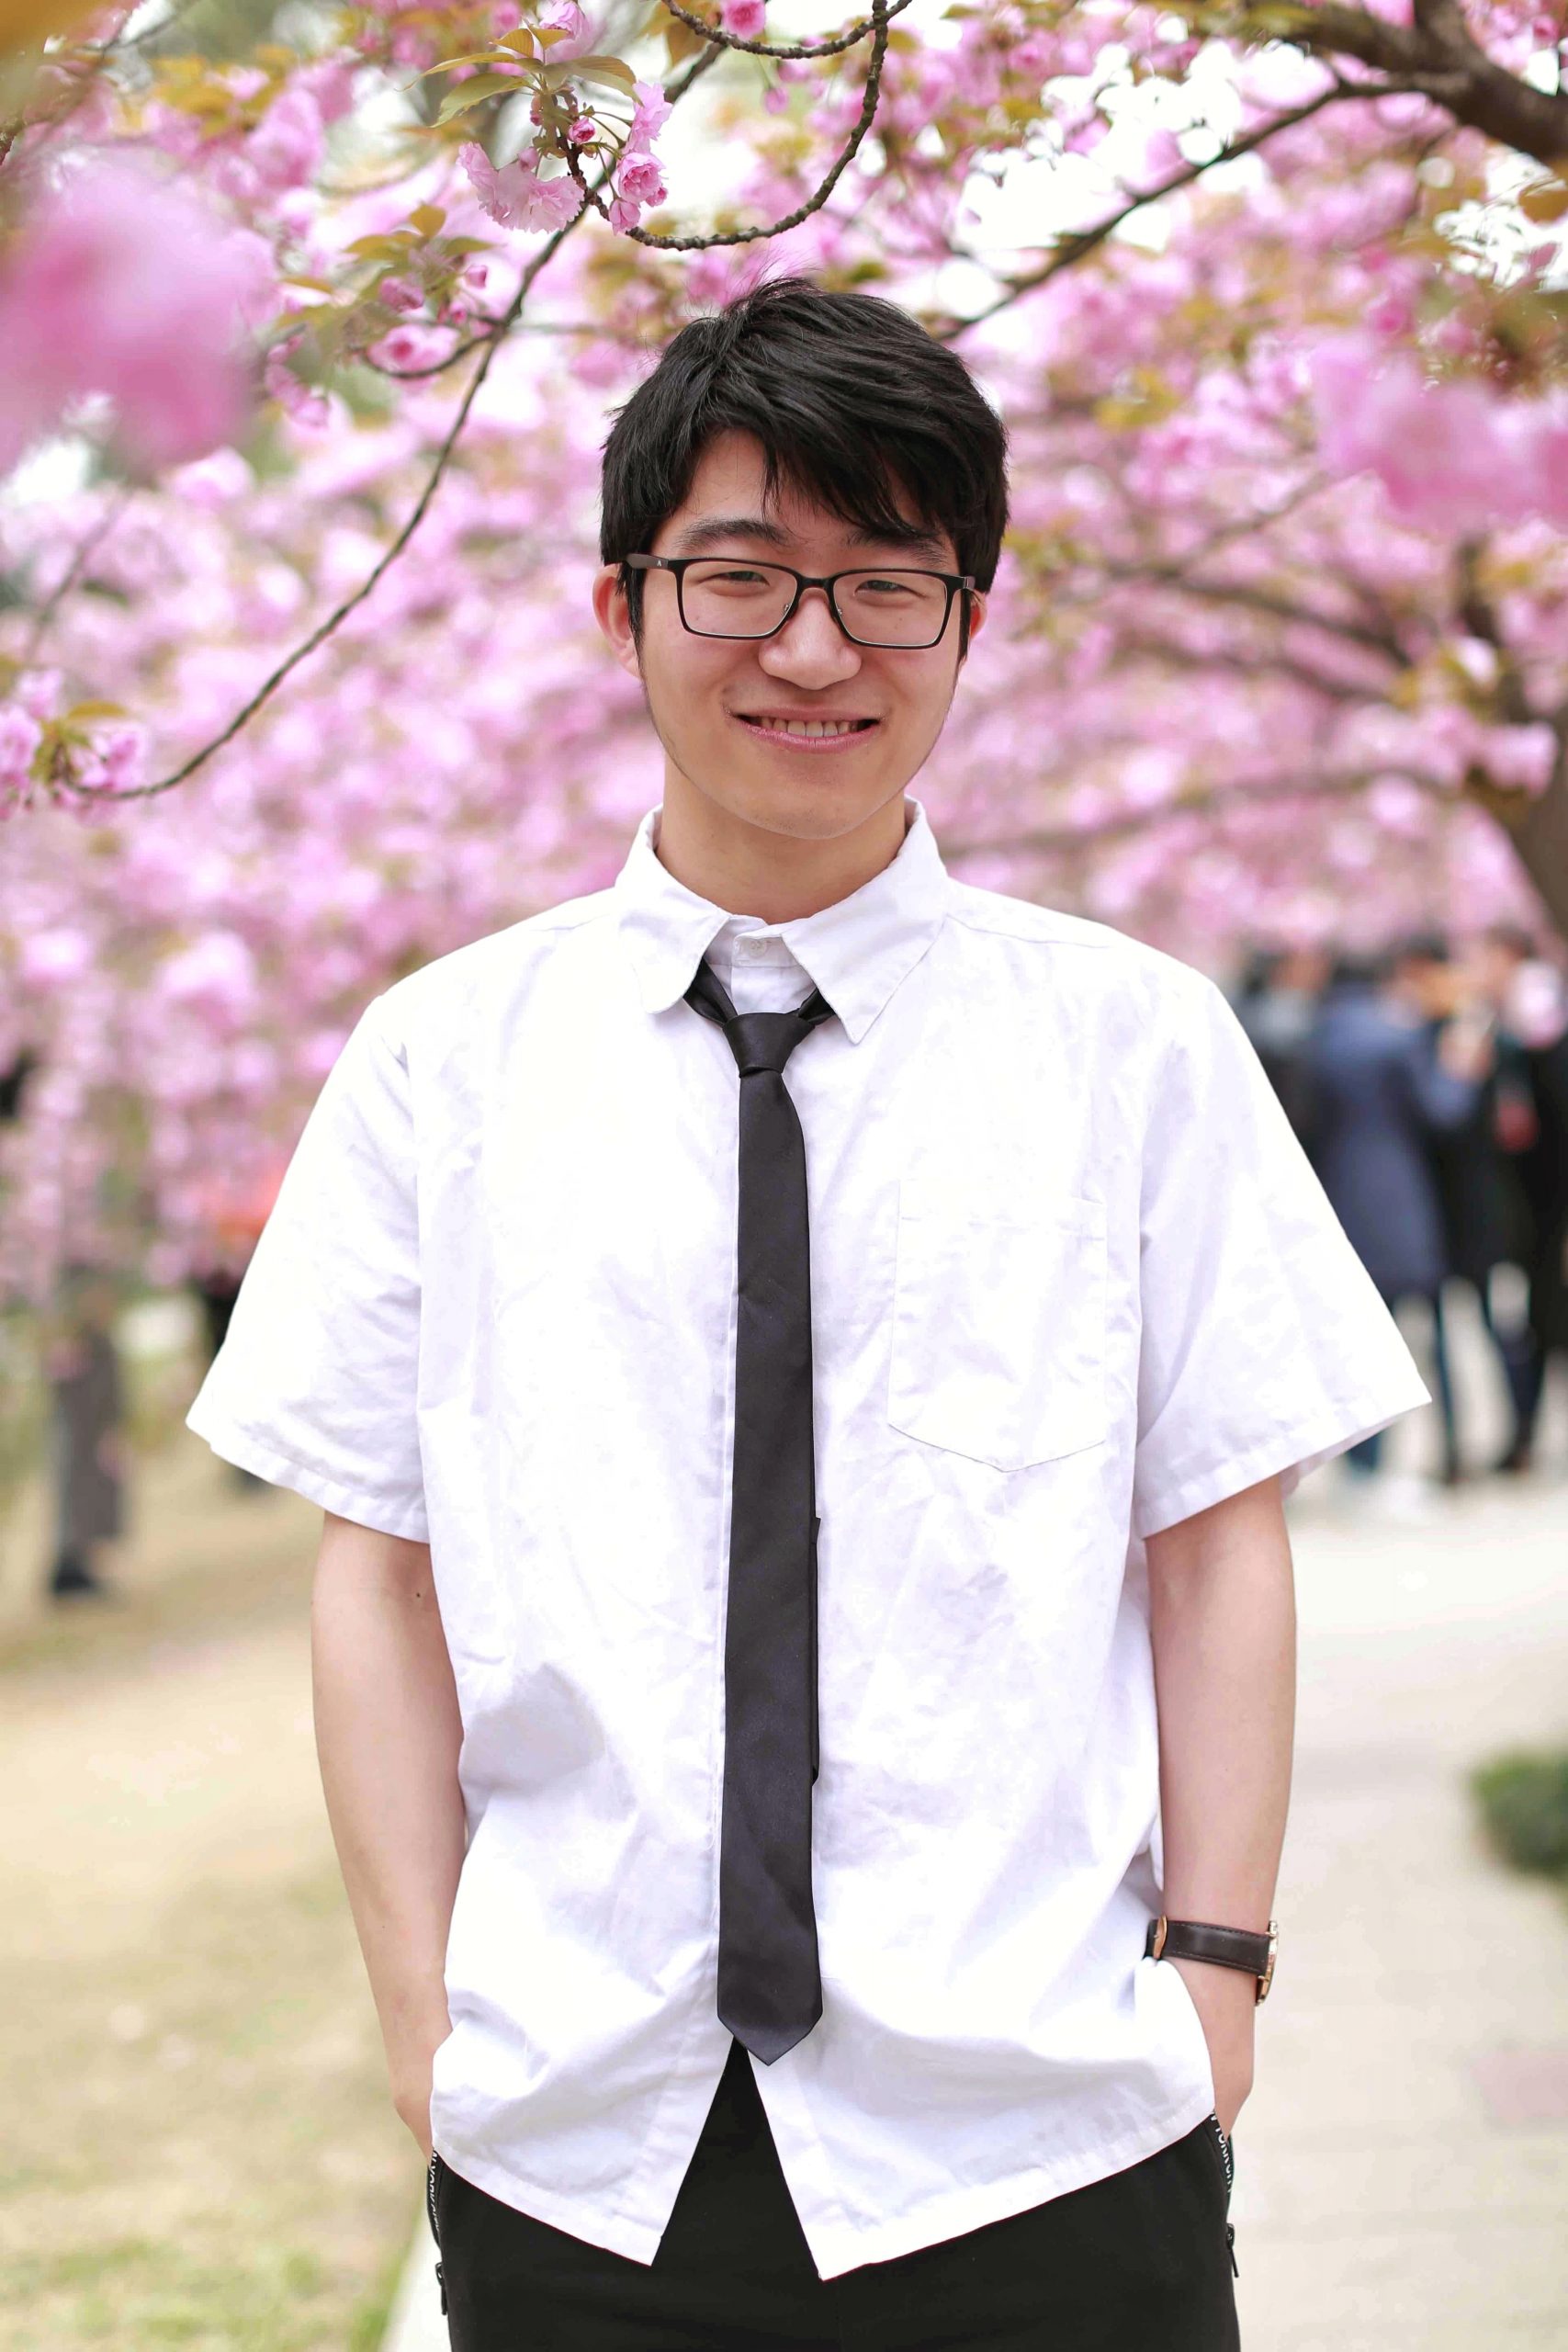 Congratulations to Ye Tian on receiving the ICSDS student travel award.